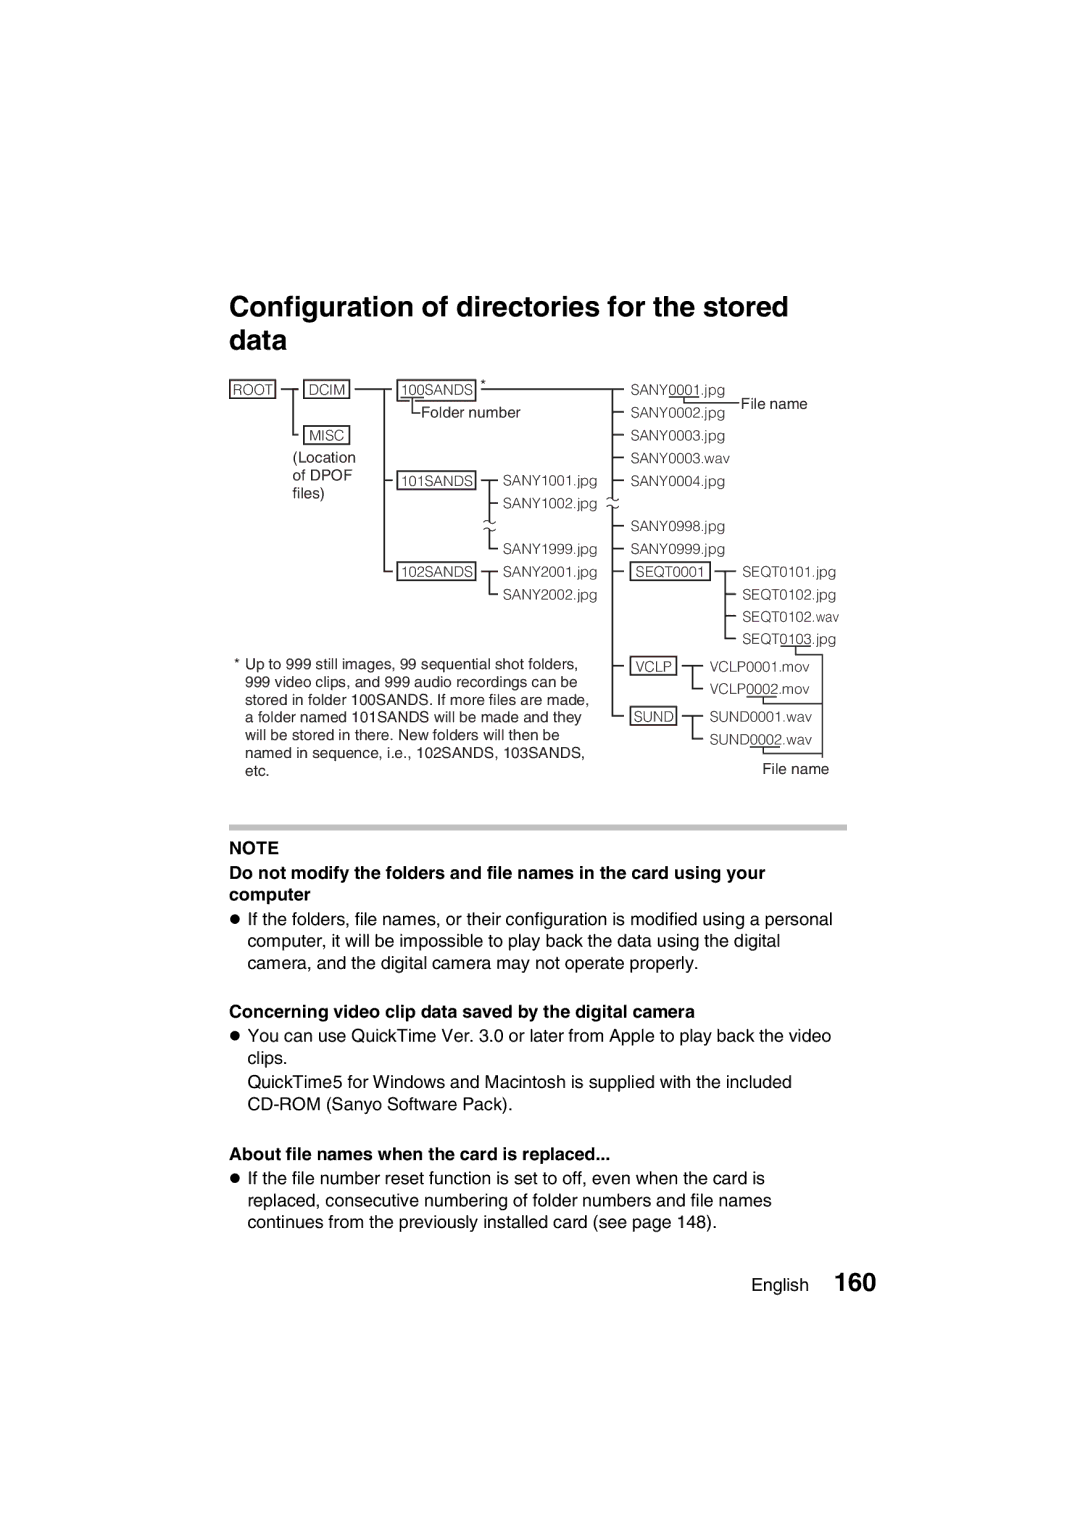 Sanyo VPC-J1 Configuration of directories for the stored data, Concerning video clip data saved by the digital camera 